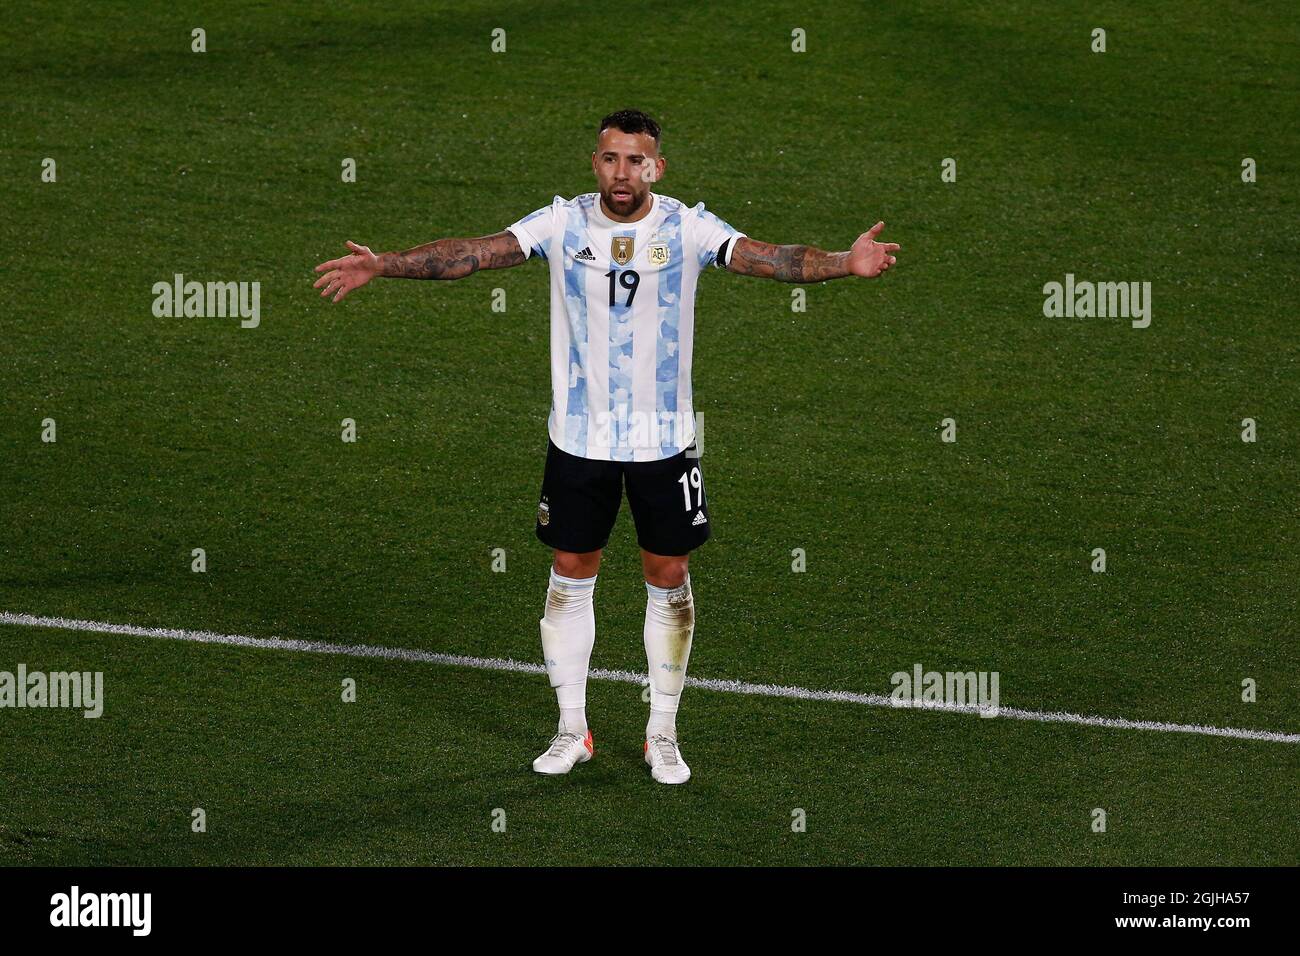 Argentina defender Nicolas Otamendi (19) reacts during a match between Argentina and Bolivia as part of South American Qualifiers for Qatar 2022 at Estadio Monumental Antonio Vespucio Liberti on September 9, 2021 in Buenos Aires, Argentina. Photo by Florencia Tan Jun/PxImages/ABACAPRESS.COM Stock Photo